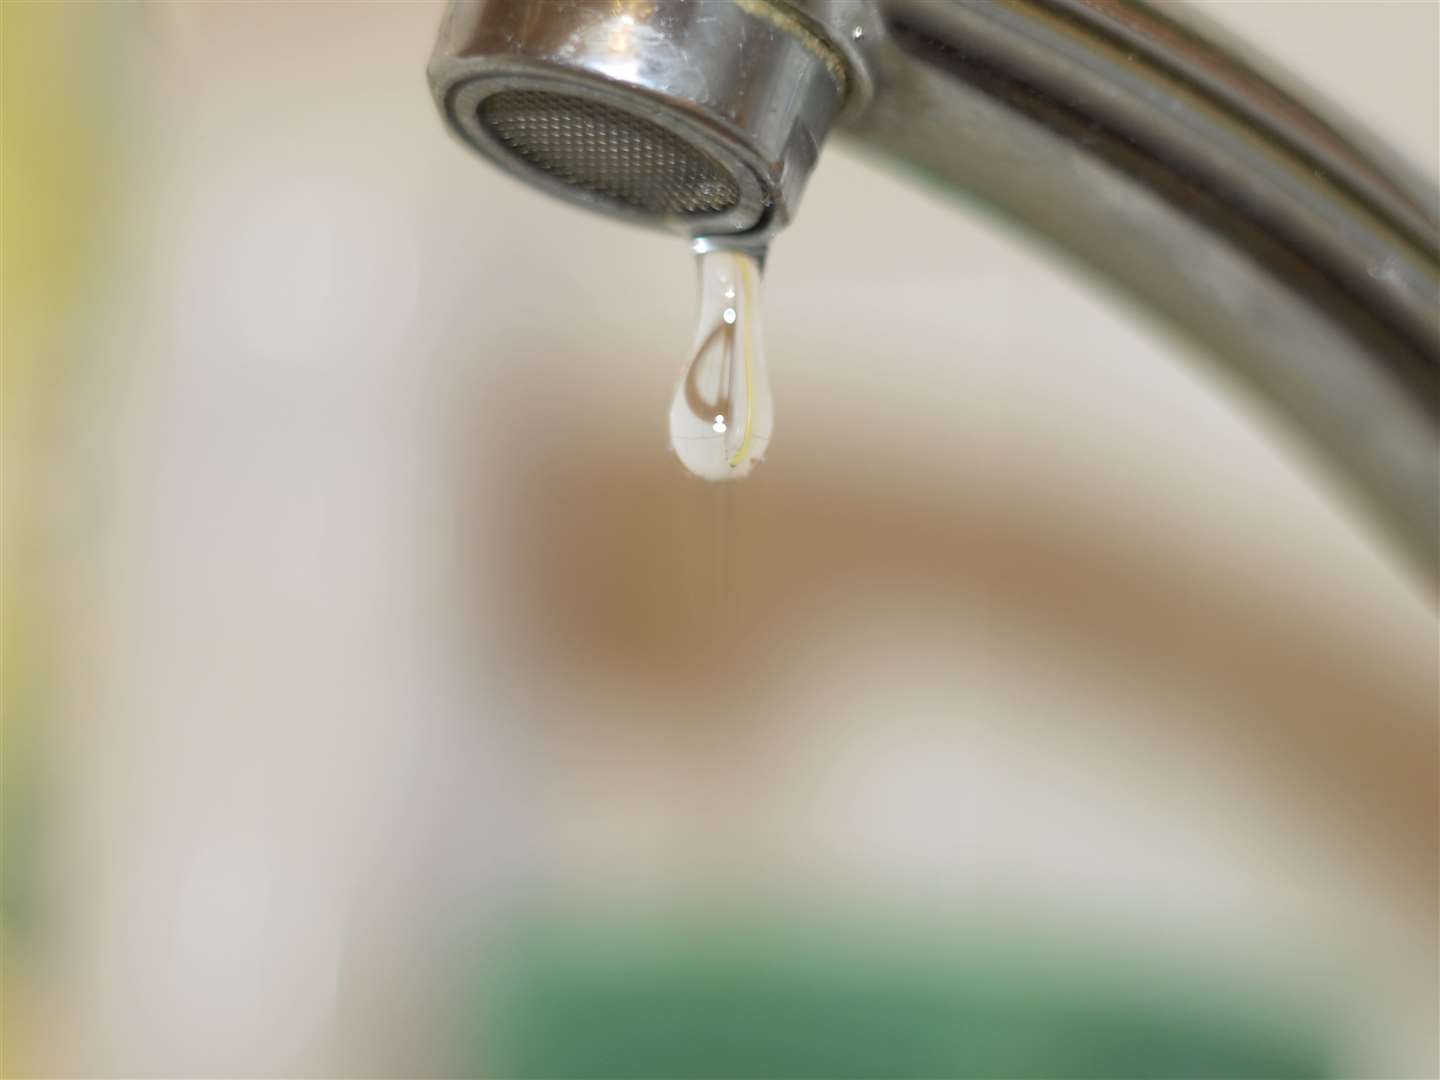 Fixing a dripping tap will cut water consumption